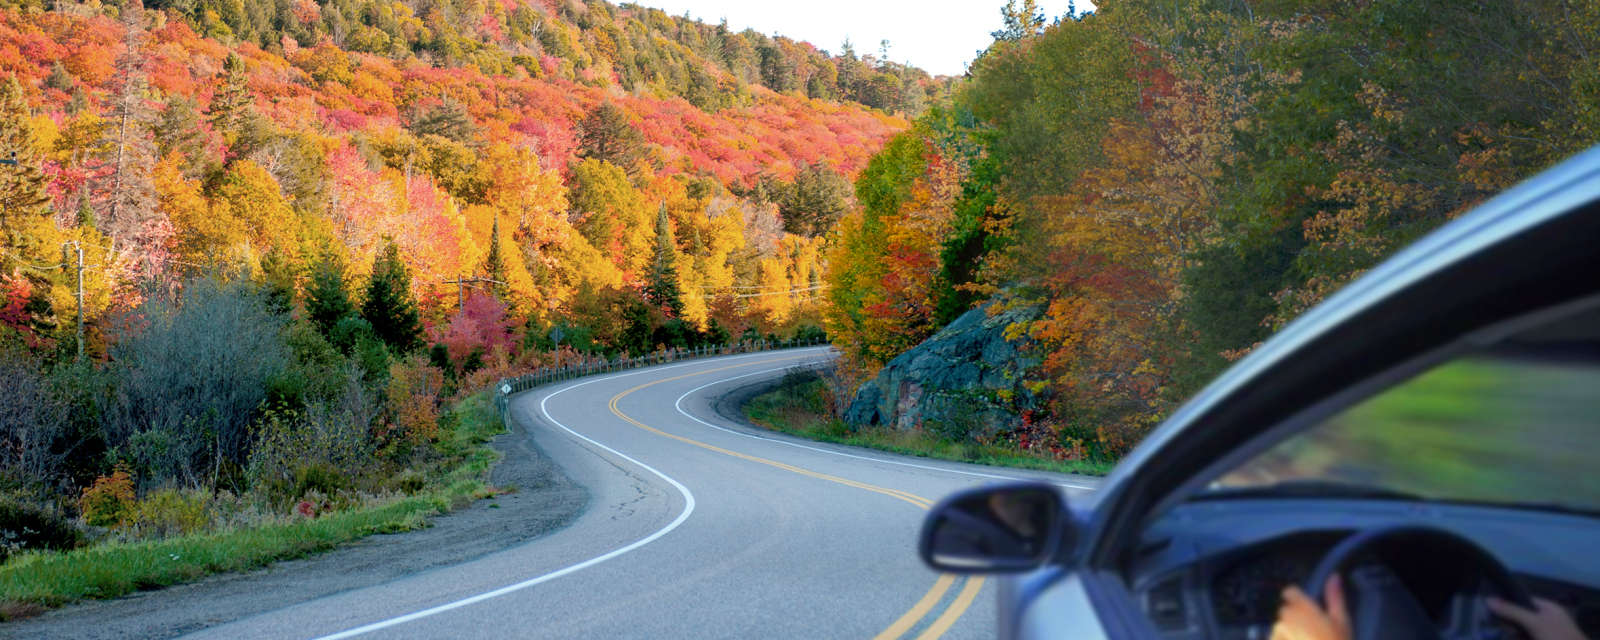 car driving along a winding road with colourful trees in background